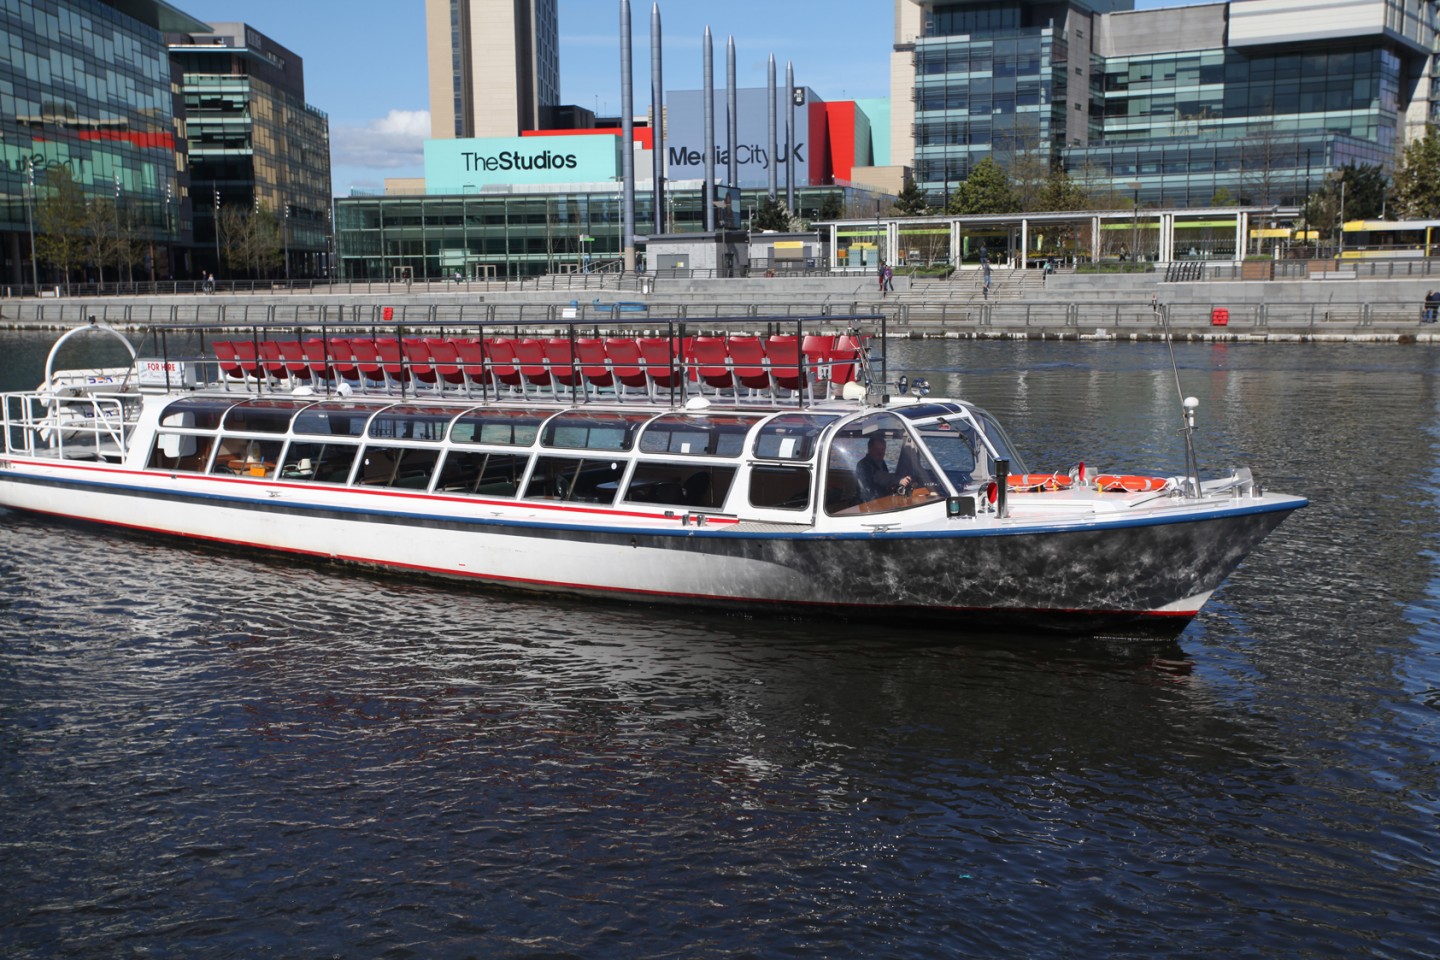 Manchester boat trip